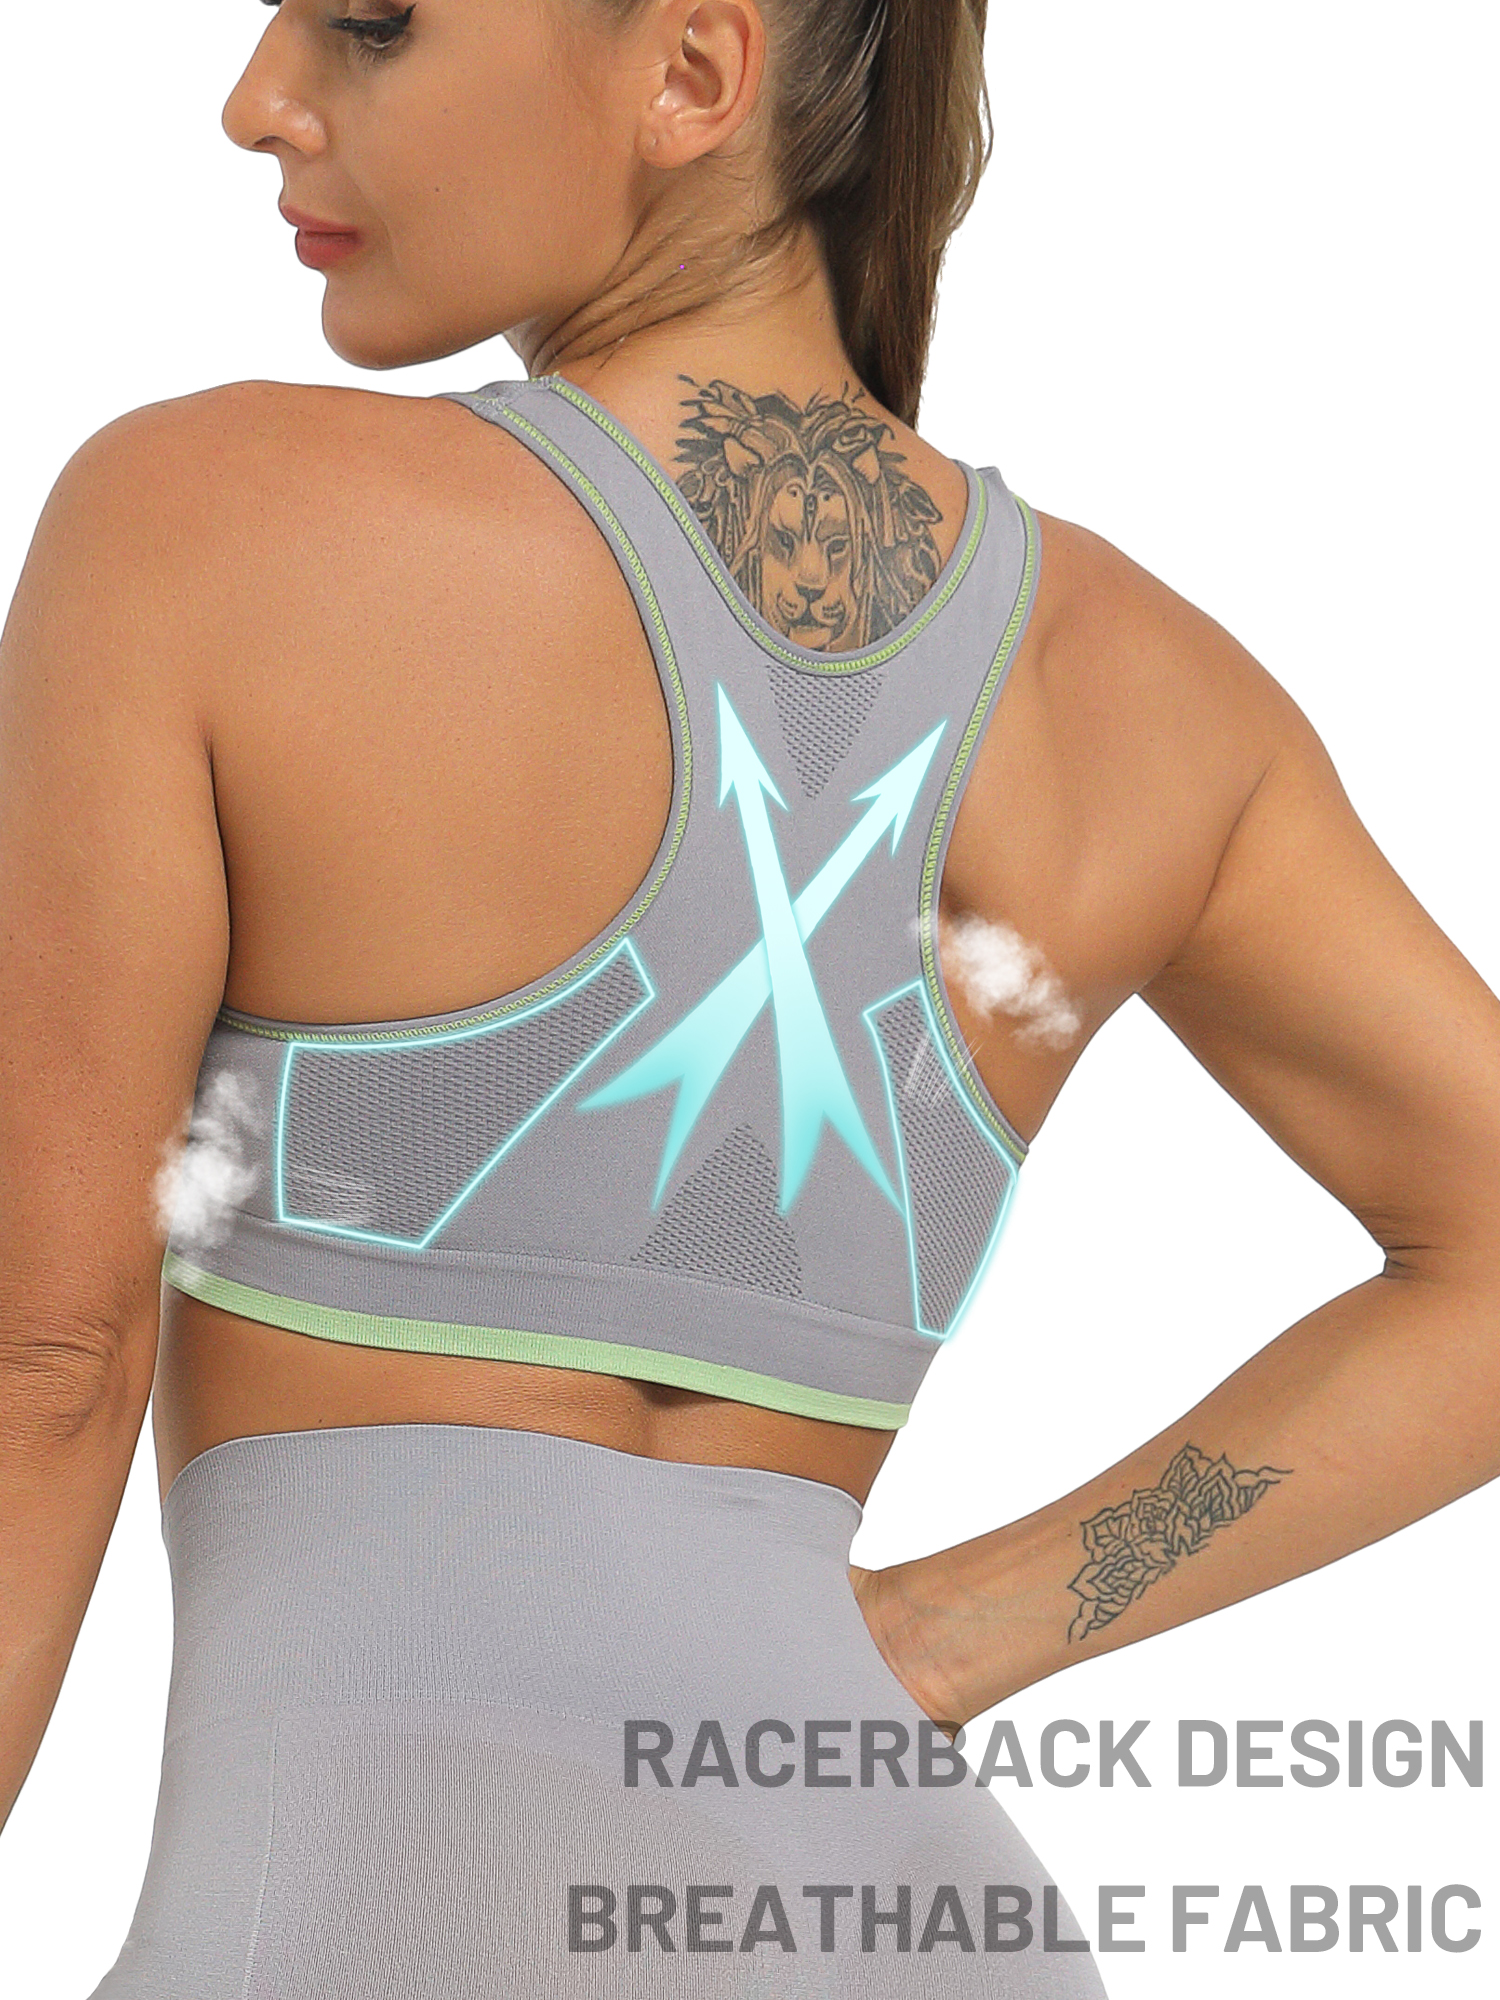 Women's Sports Bras High Impact Seamless Yoga Racerback with Removable Cups - image 3 of 6